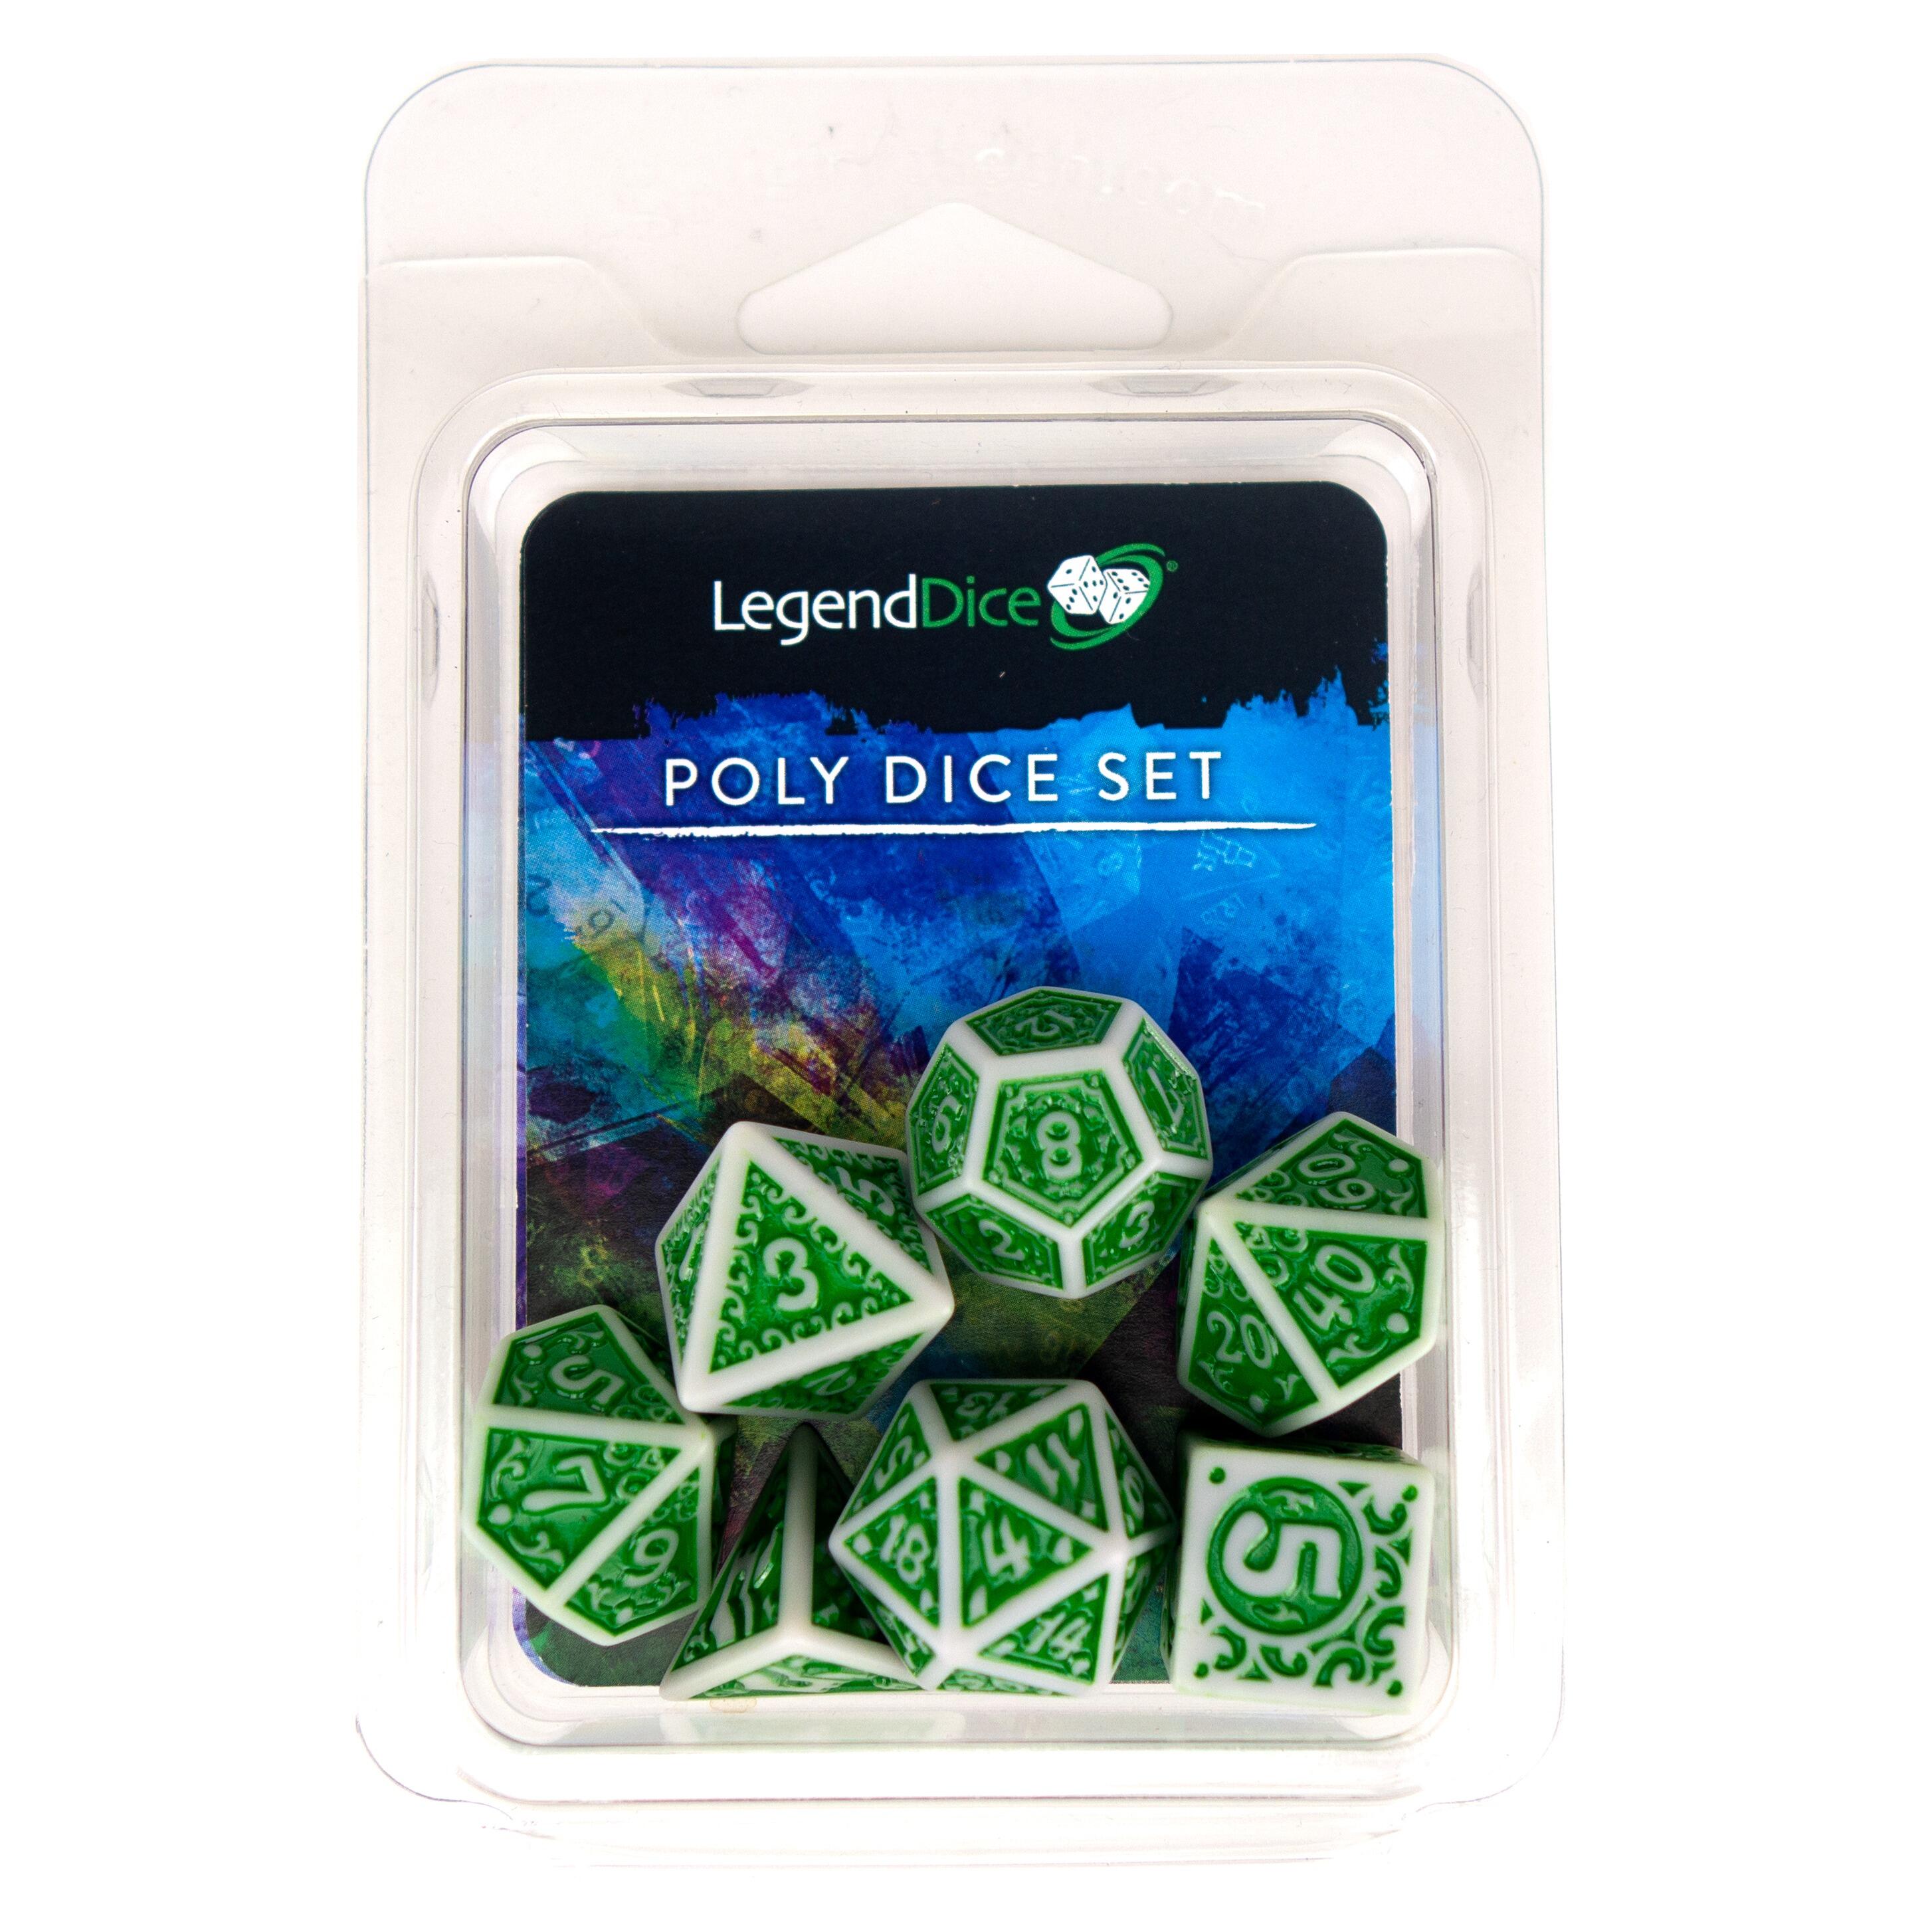 YES 14pcs Digital Glowing Dice Set Fun Puzzle Polyset Dice for